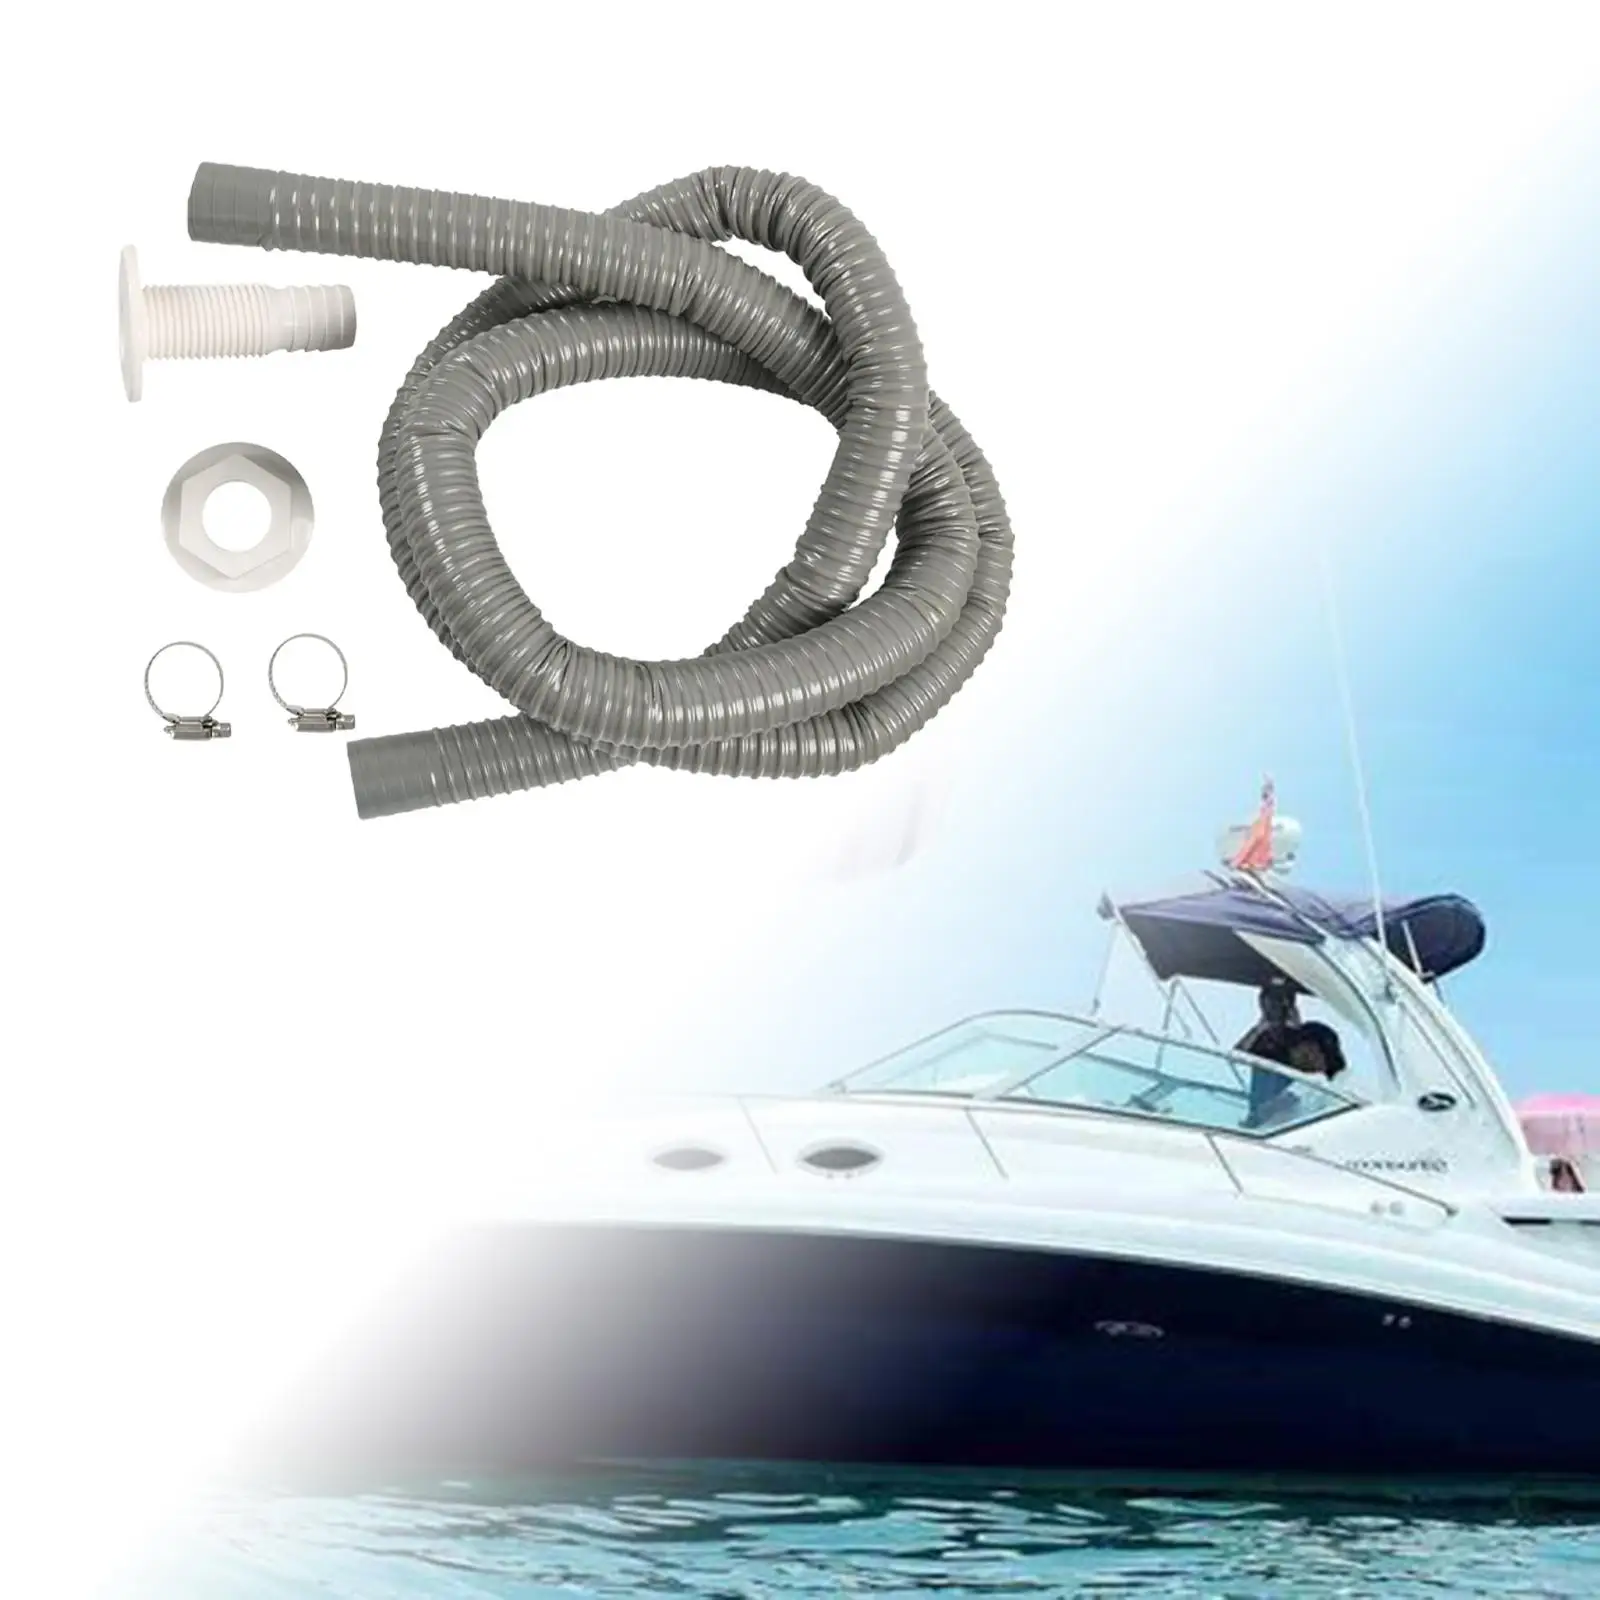 

1-1/8 inch Marine Bilge Pump Kit Includes 6 ft. Hose, 2 Hose Clamps, and thru Hull Fitting Heavy Duty Boat Bilge Water Pump Kit